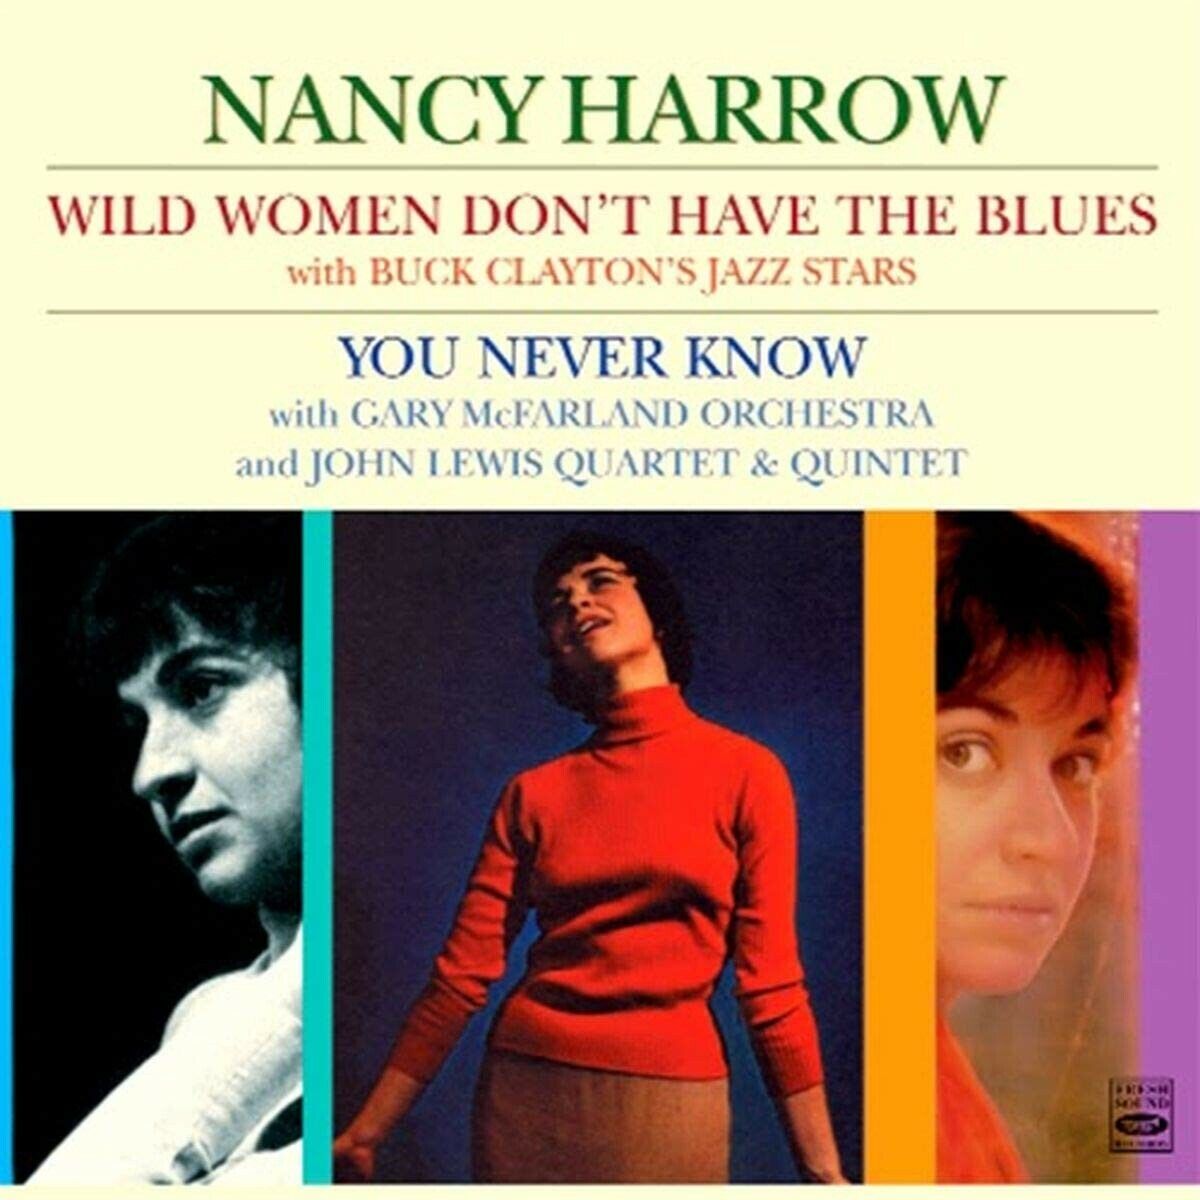 Nancy Harrow Wild Women Don't Have The Blues + You Never Know (2 LP On 1 CD)